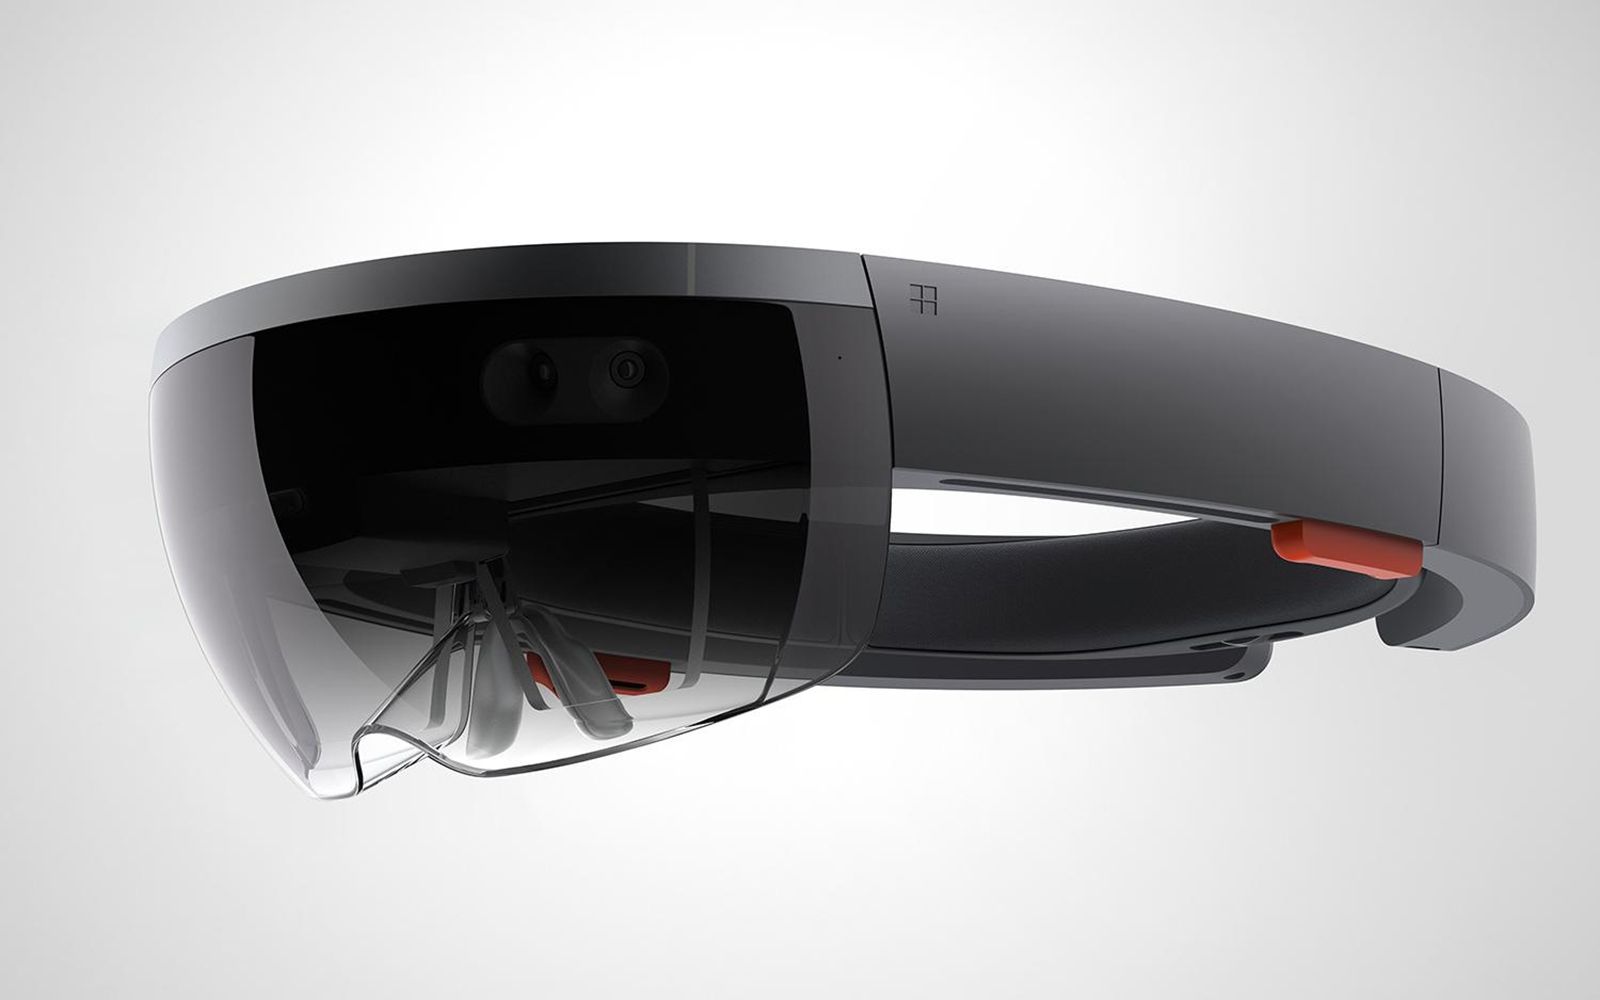 microsoft hololens video shows amazing holographic future is near image 1